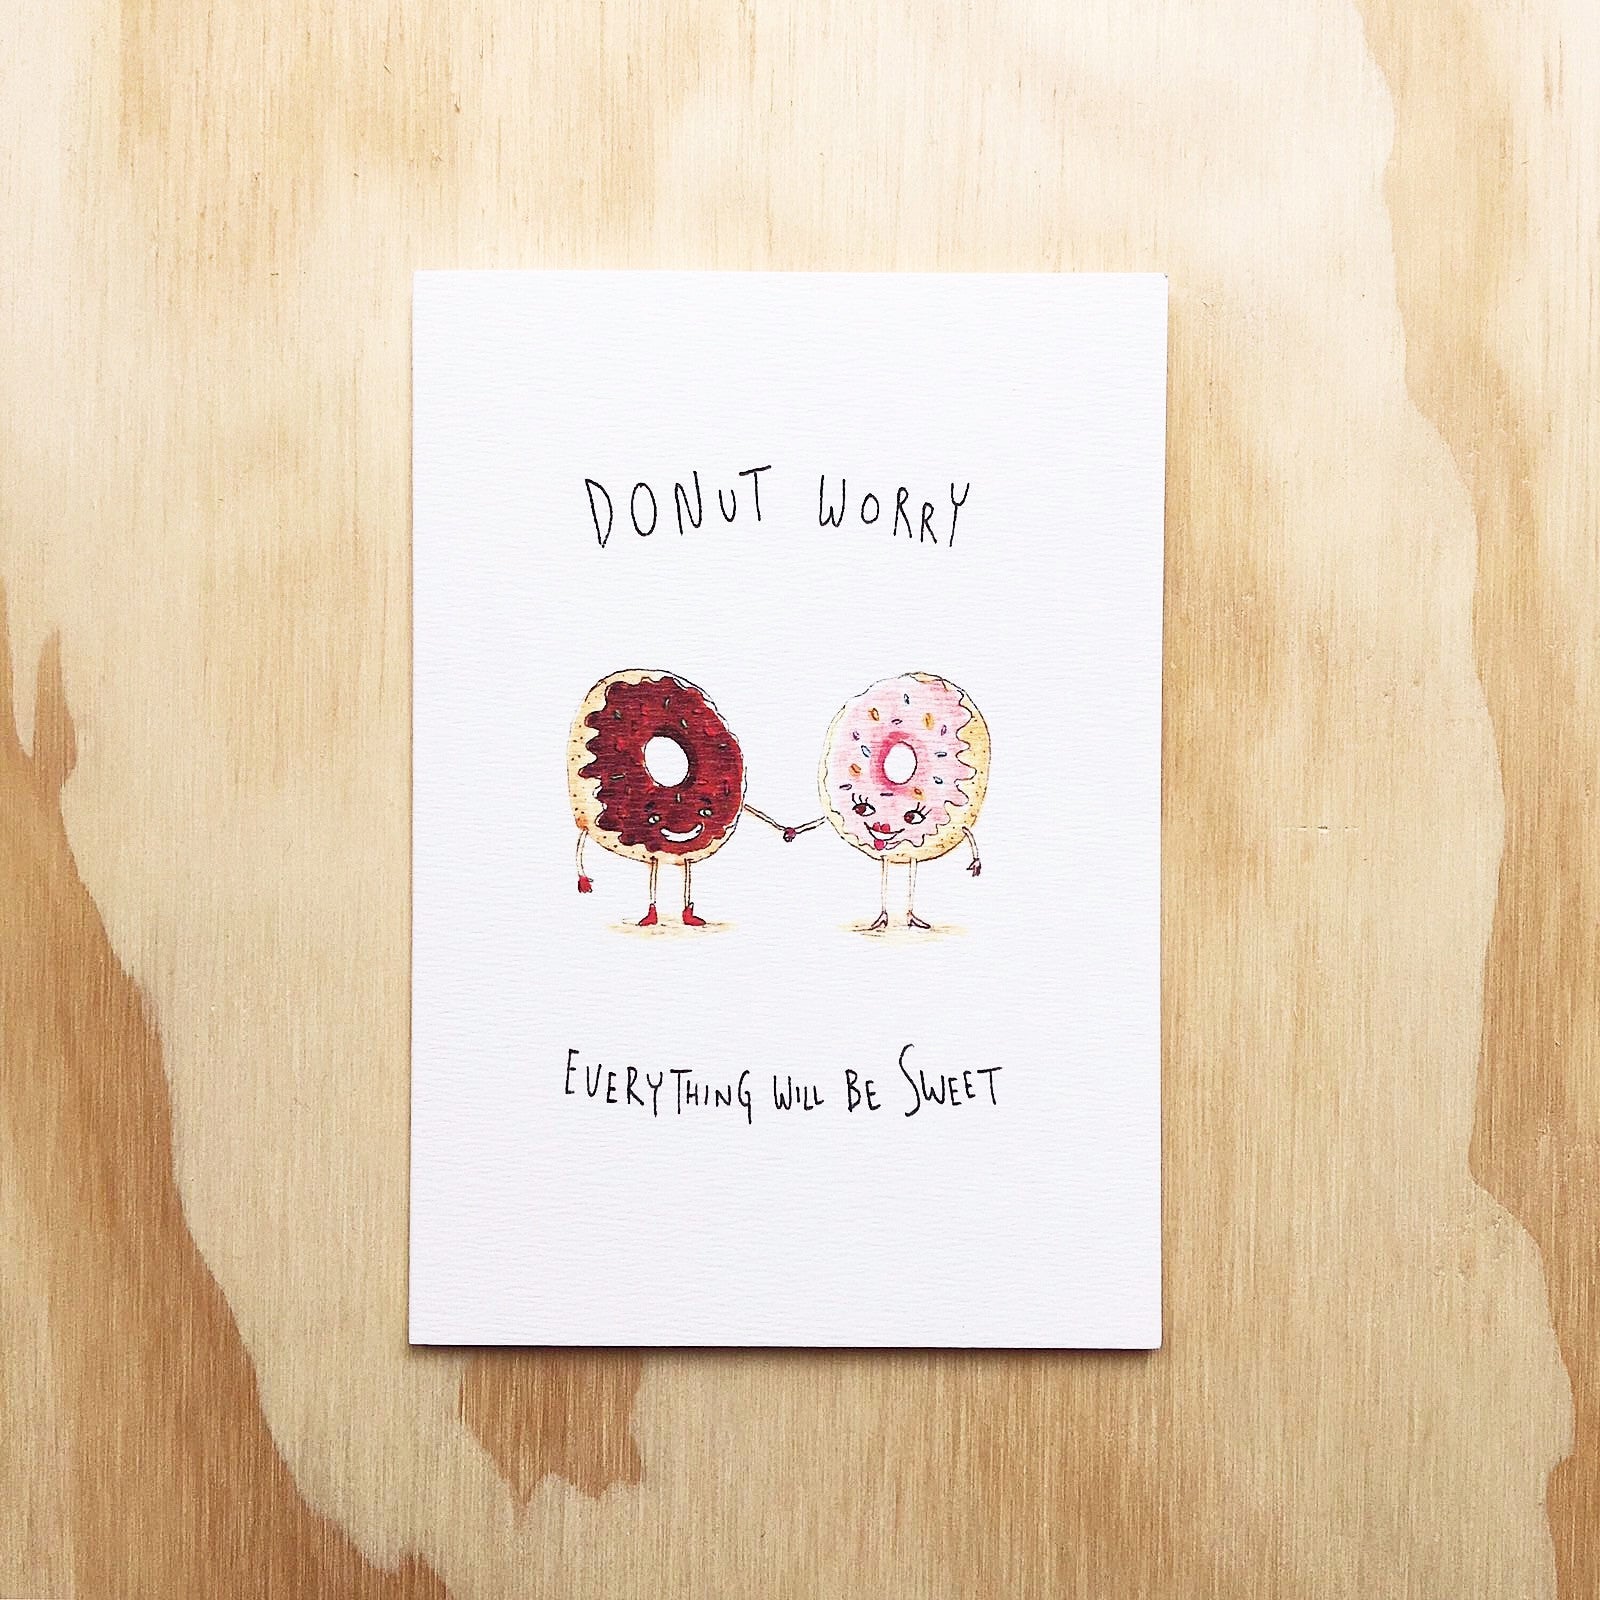 Donut Worry Everything Will Be Sweet - Well Drawn